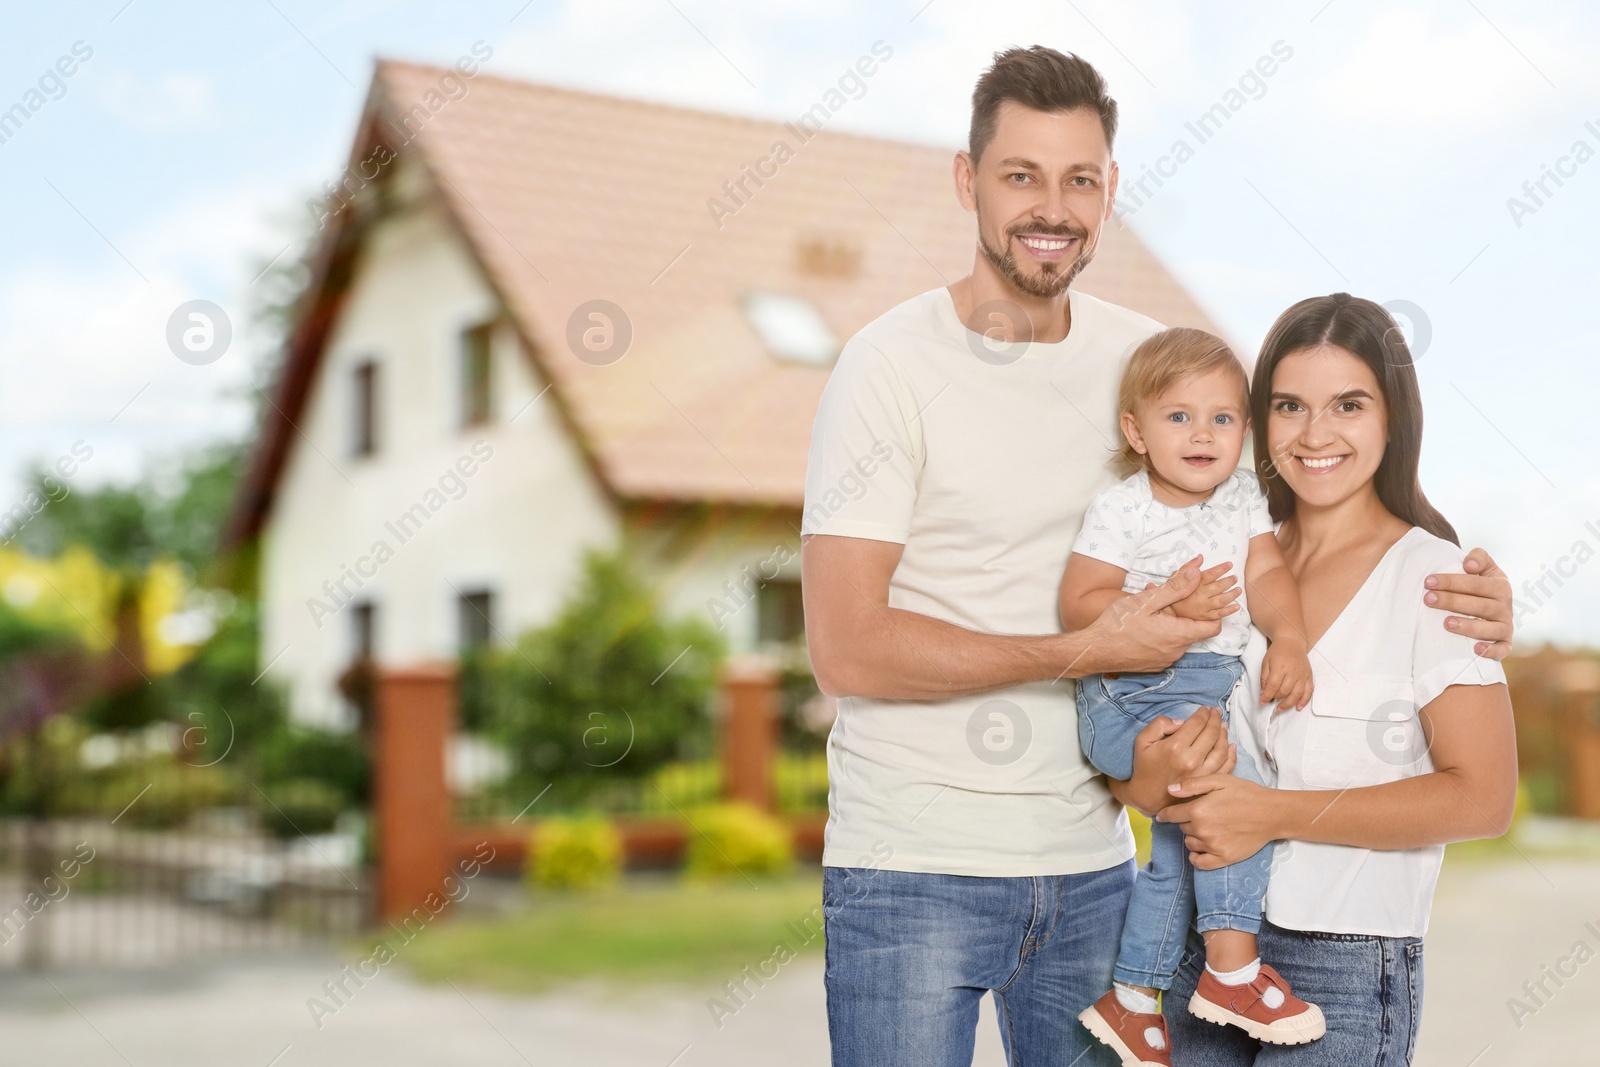 Image of Dream home. Happy family near big beautiful house. Space for text